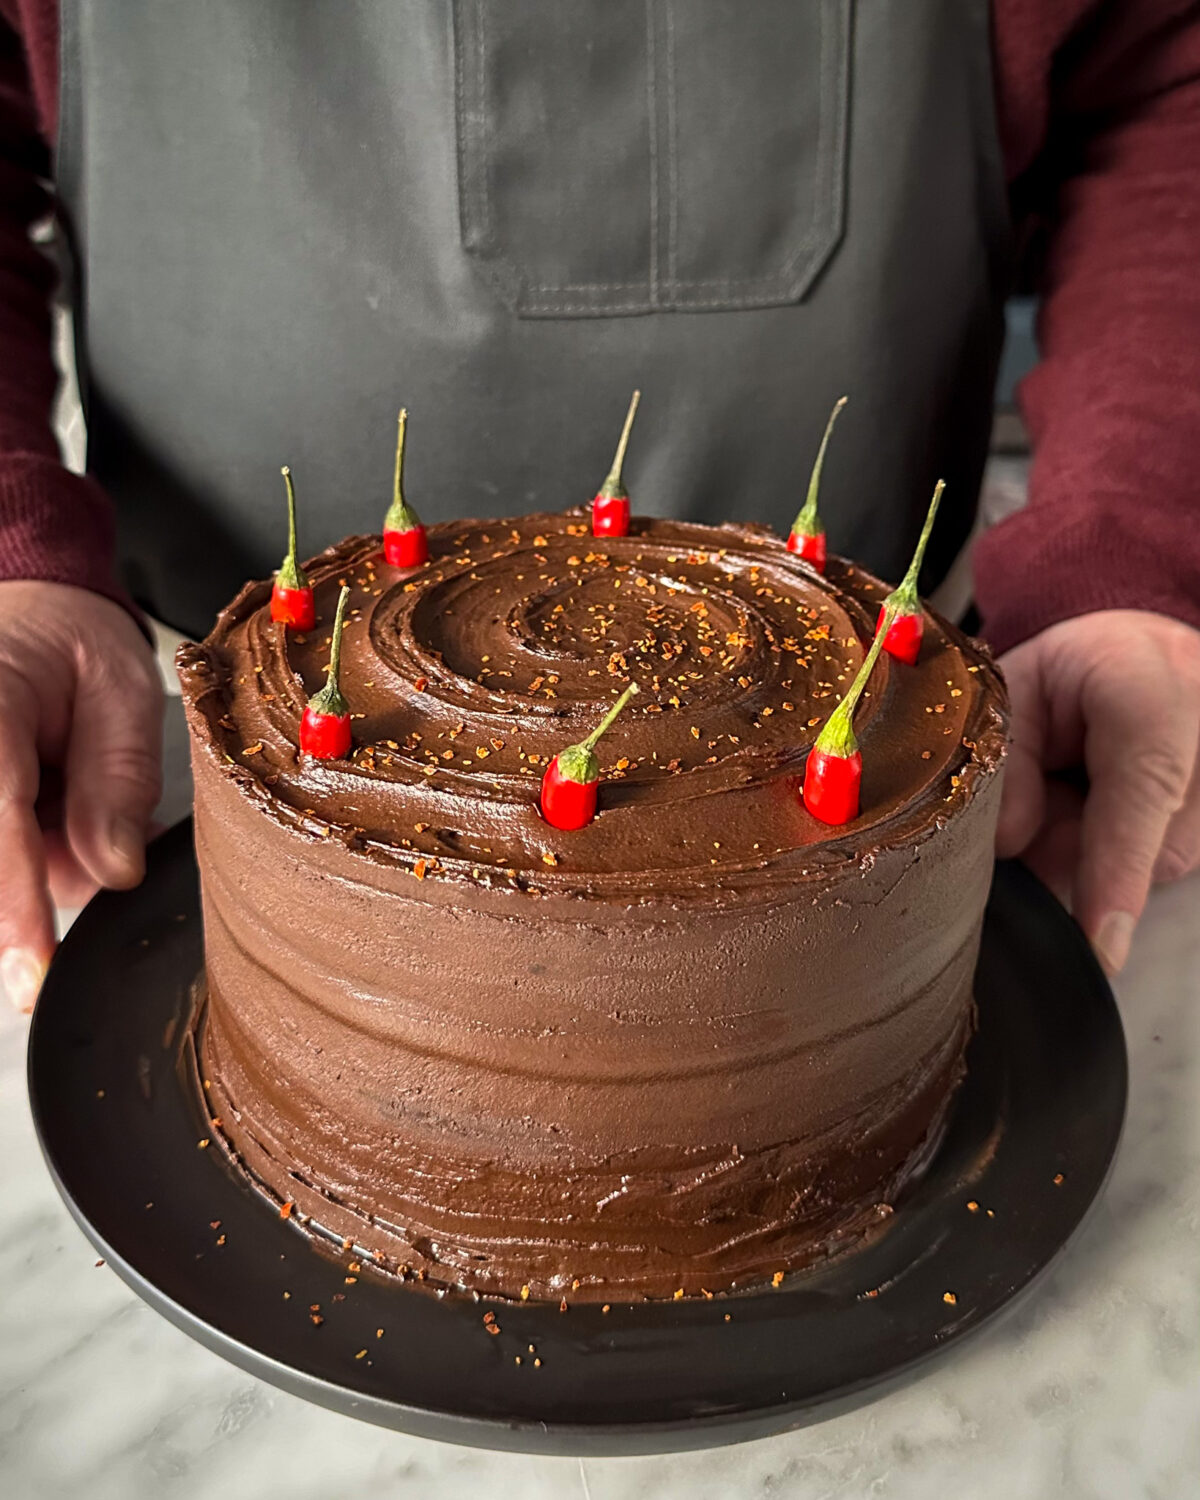 Sprinkle with Korean chili flakes and spear Bird's Eye chilies (optional) into the cake for garnish.